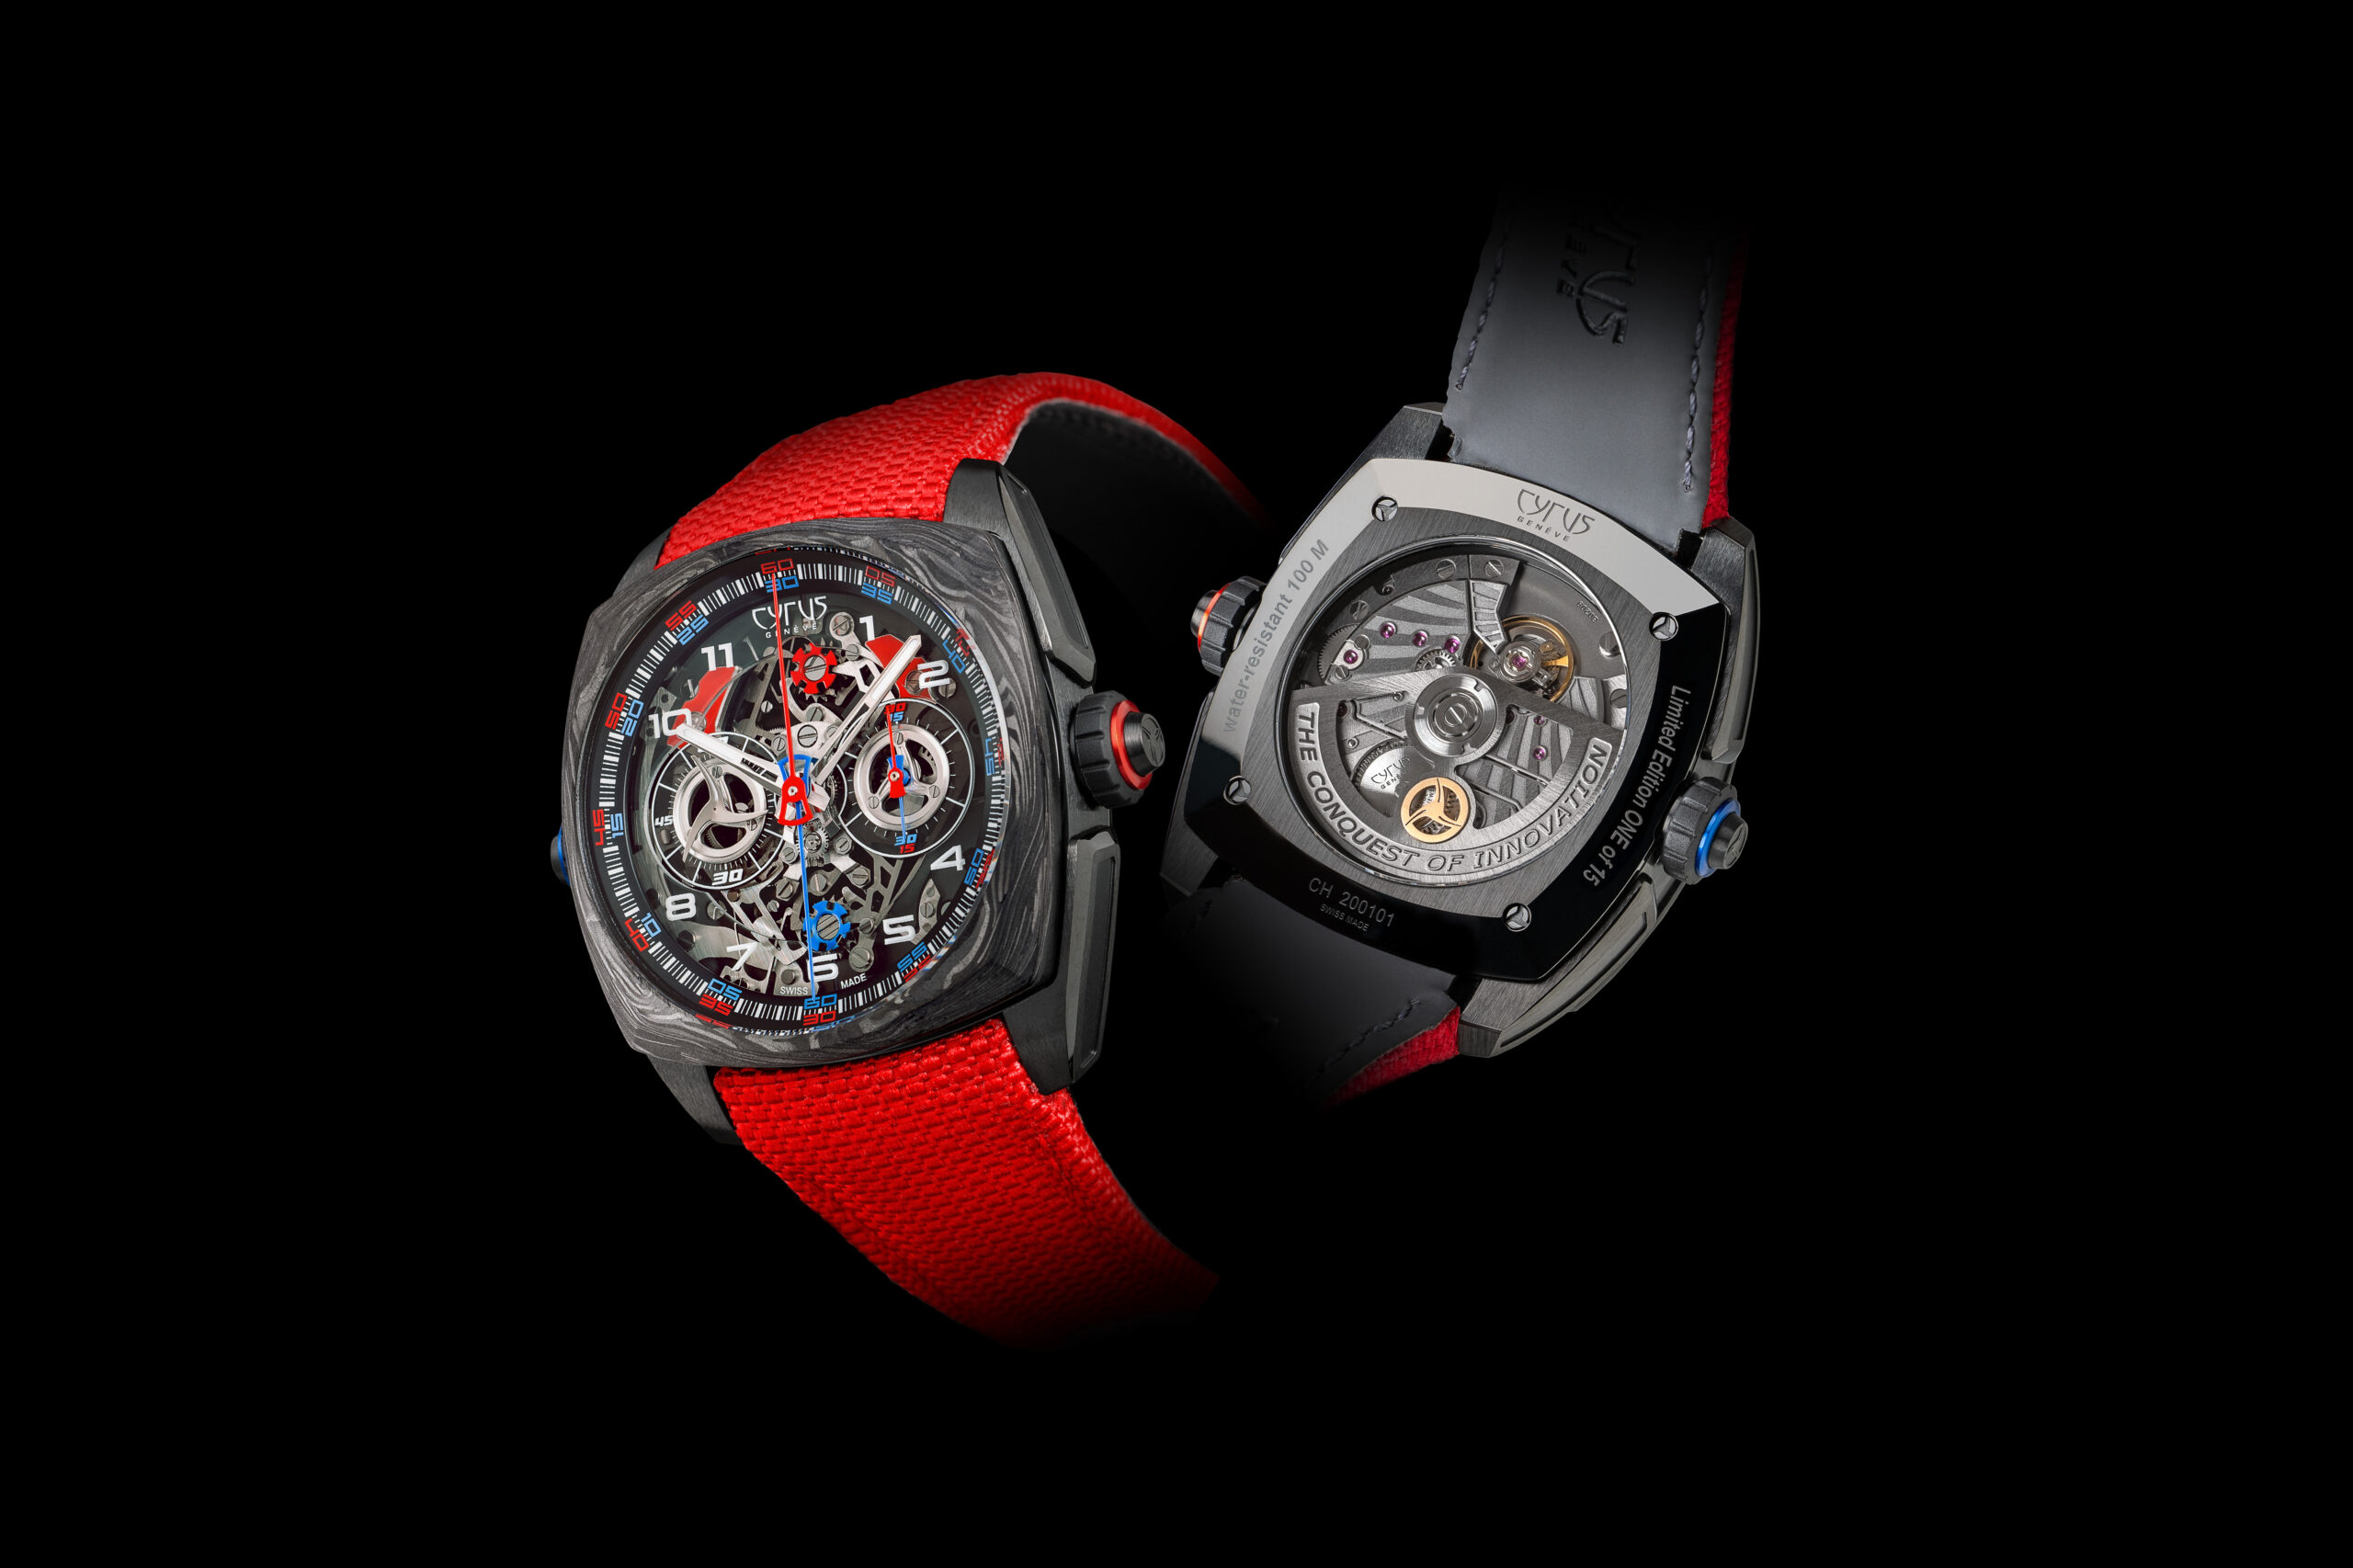 The devoy group racing adlc double chronograph dice composite scaled